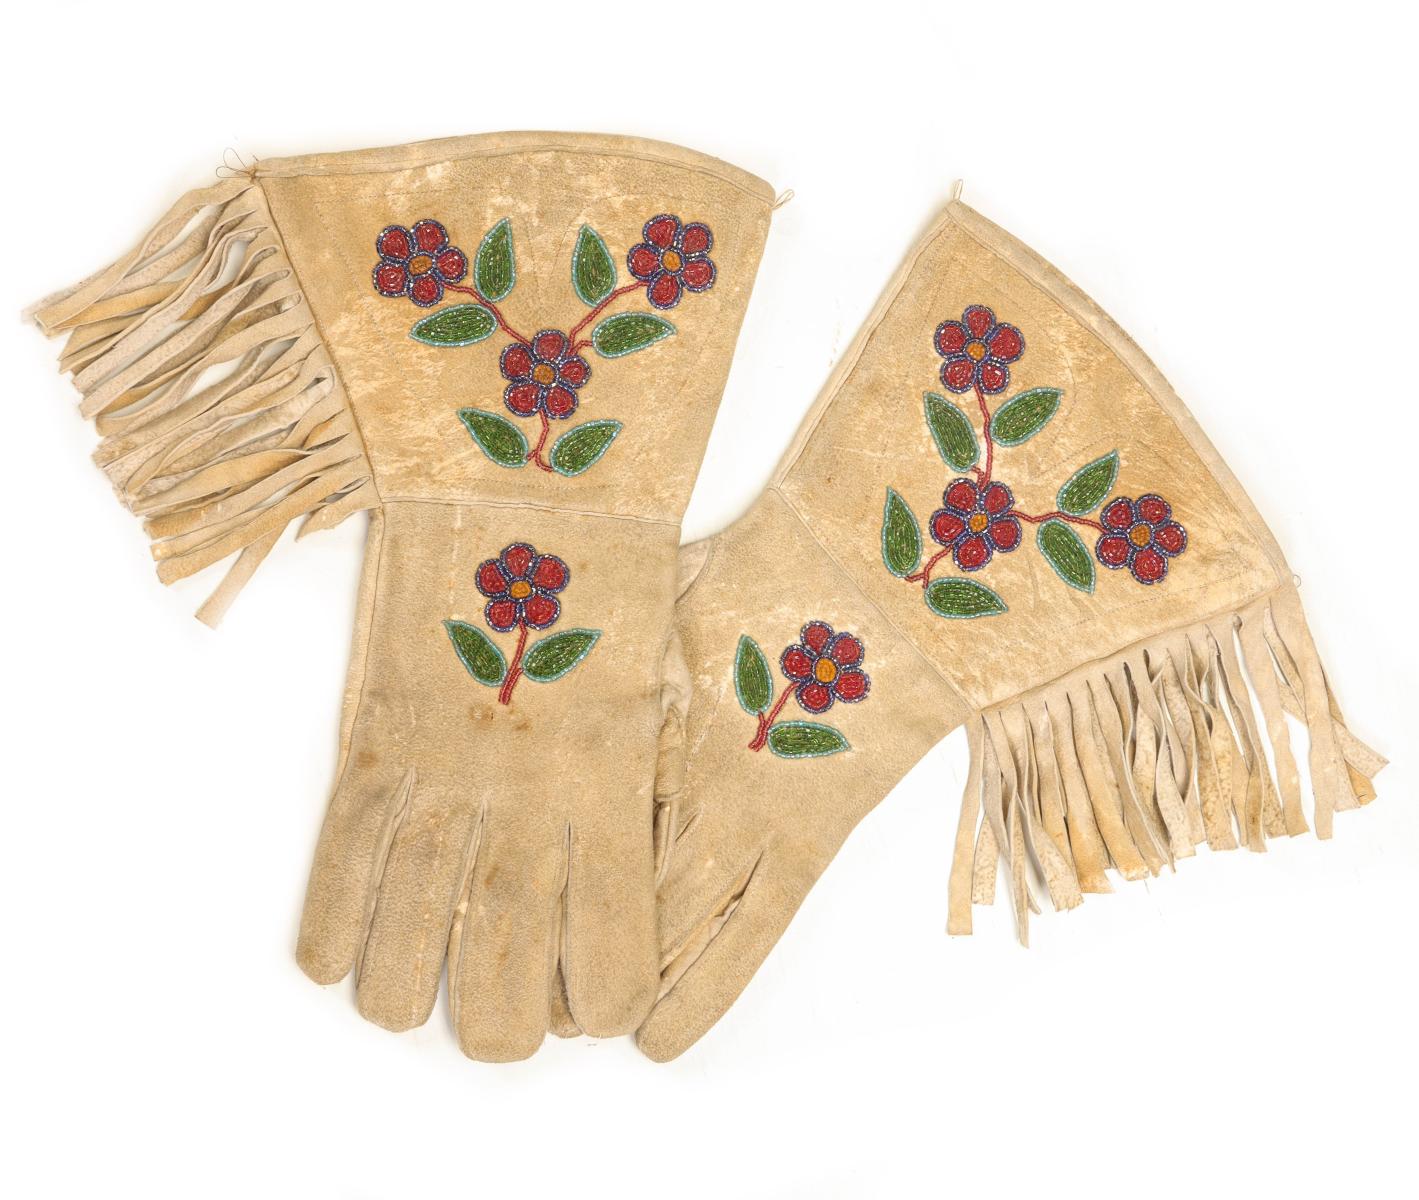 A PAIR OF BEADED HIDE PLATEAU GAUNTLETS CIRCA 1920